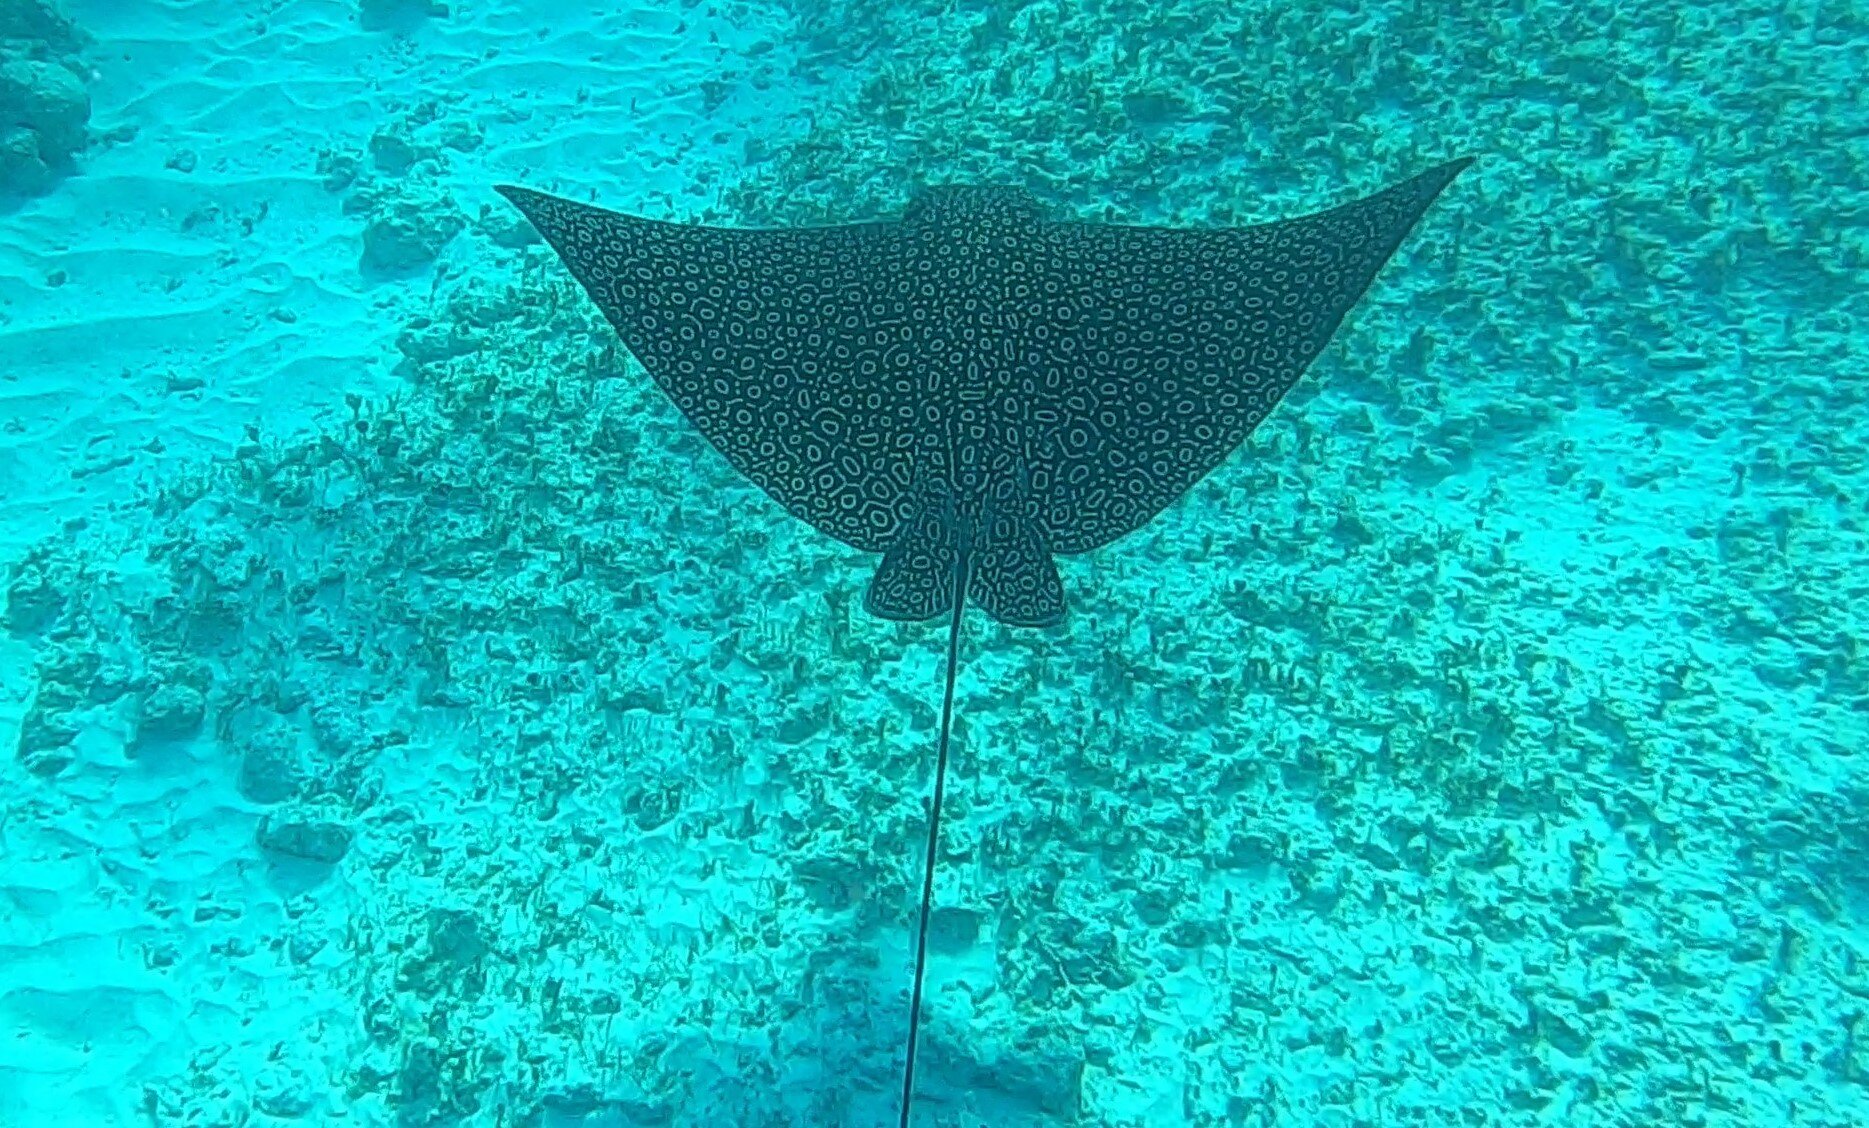 Spotted Eagle Ray.jpg